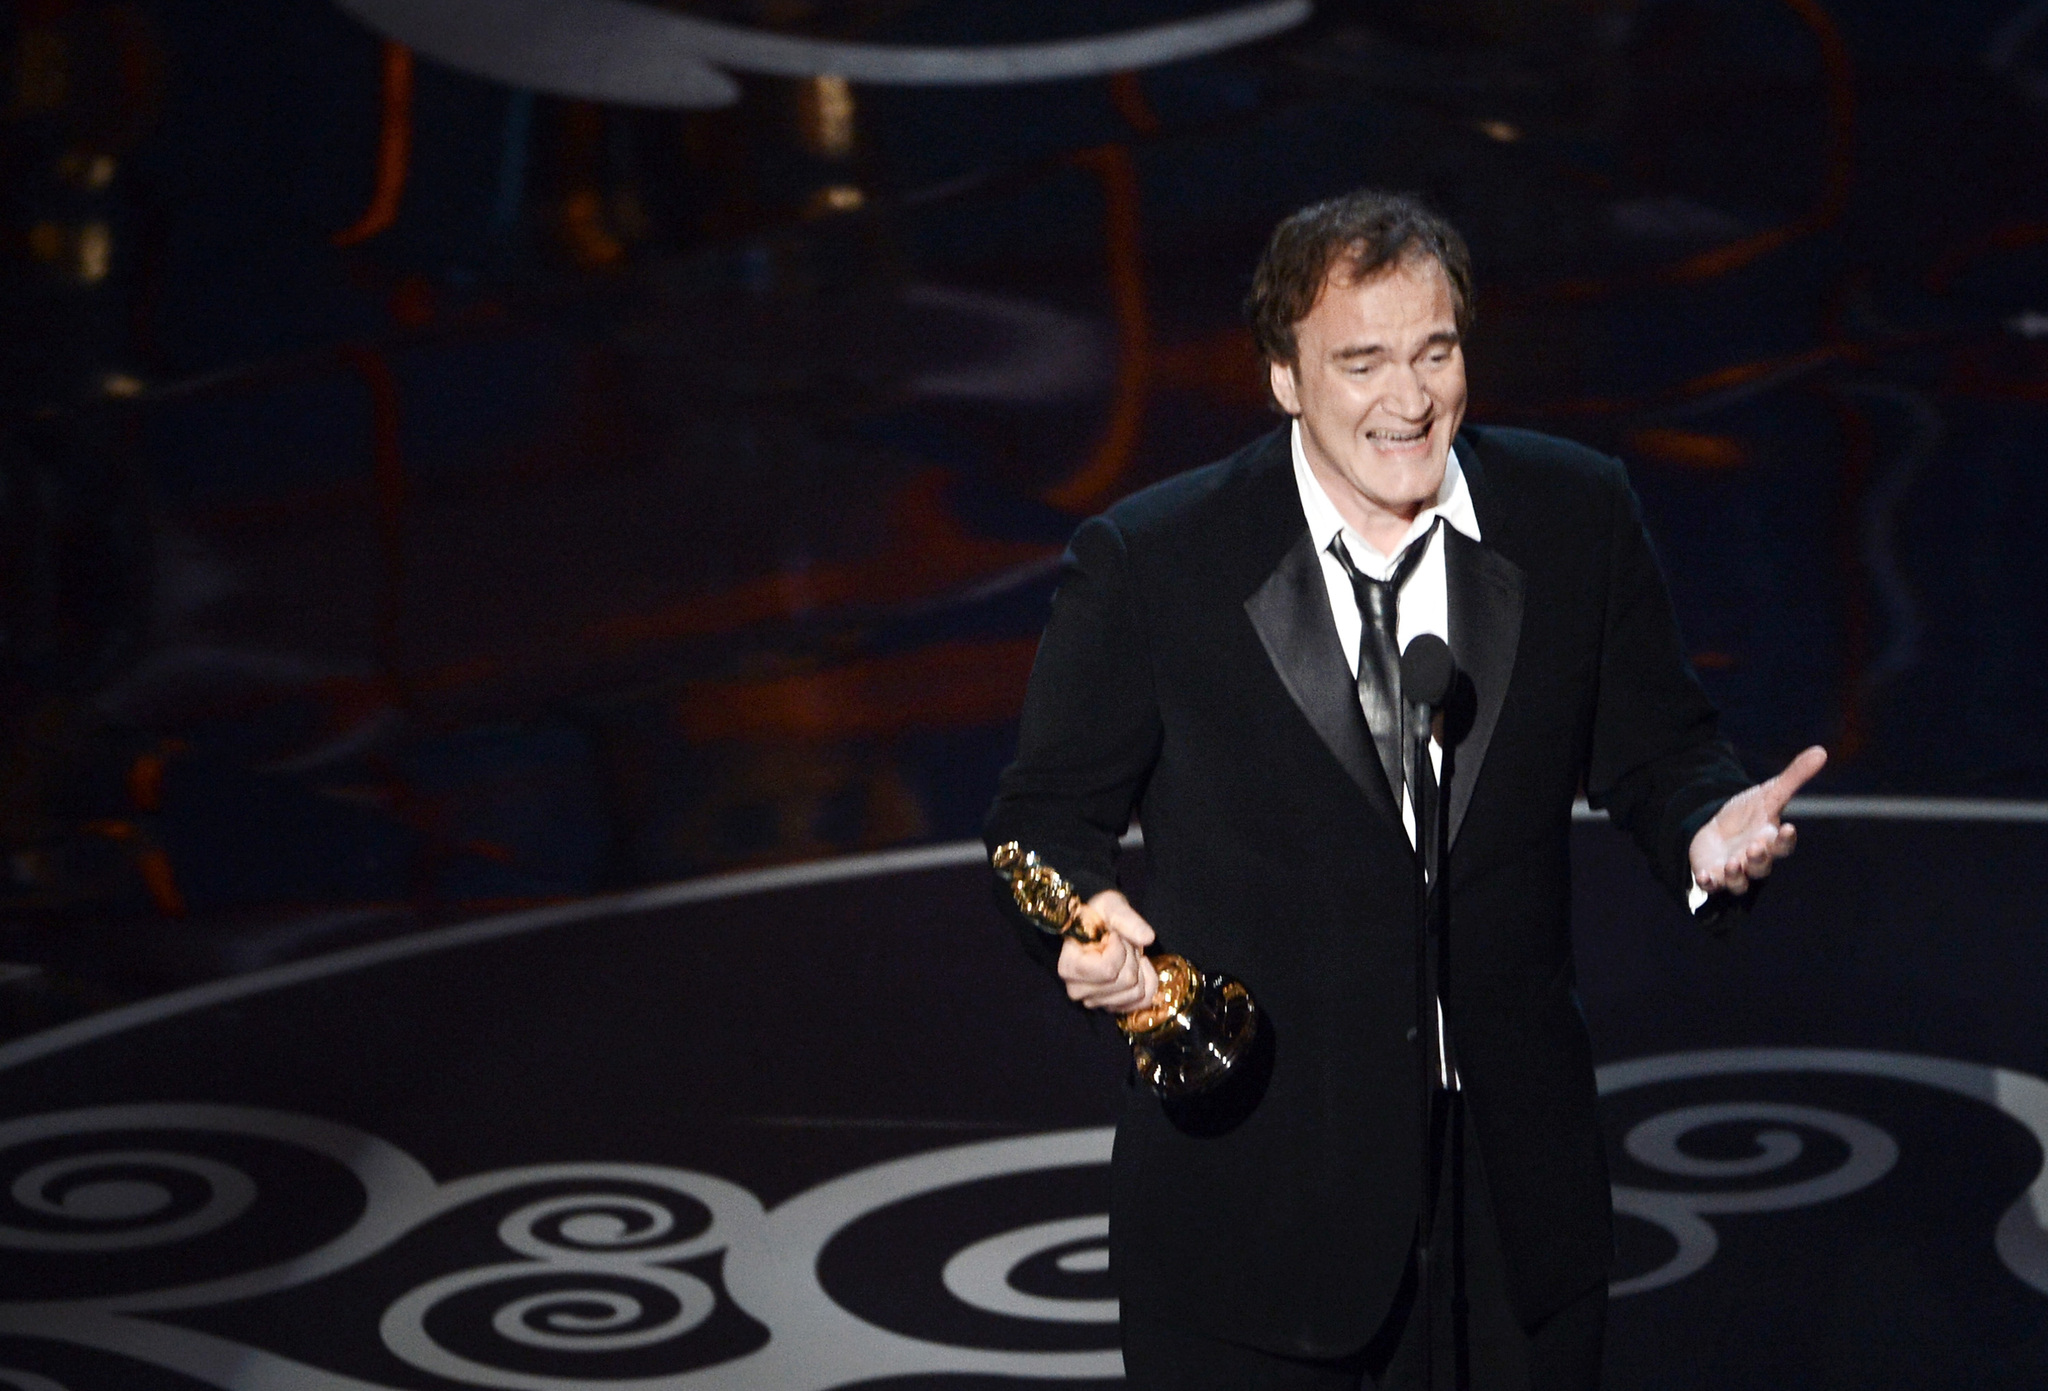 Quentin Tarantino at event of The Oscars (2013)